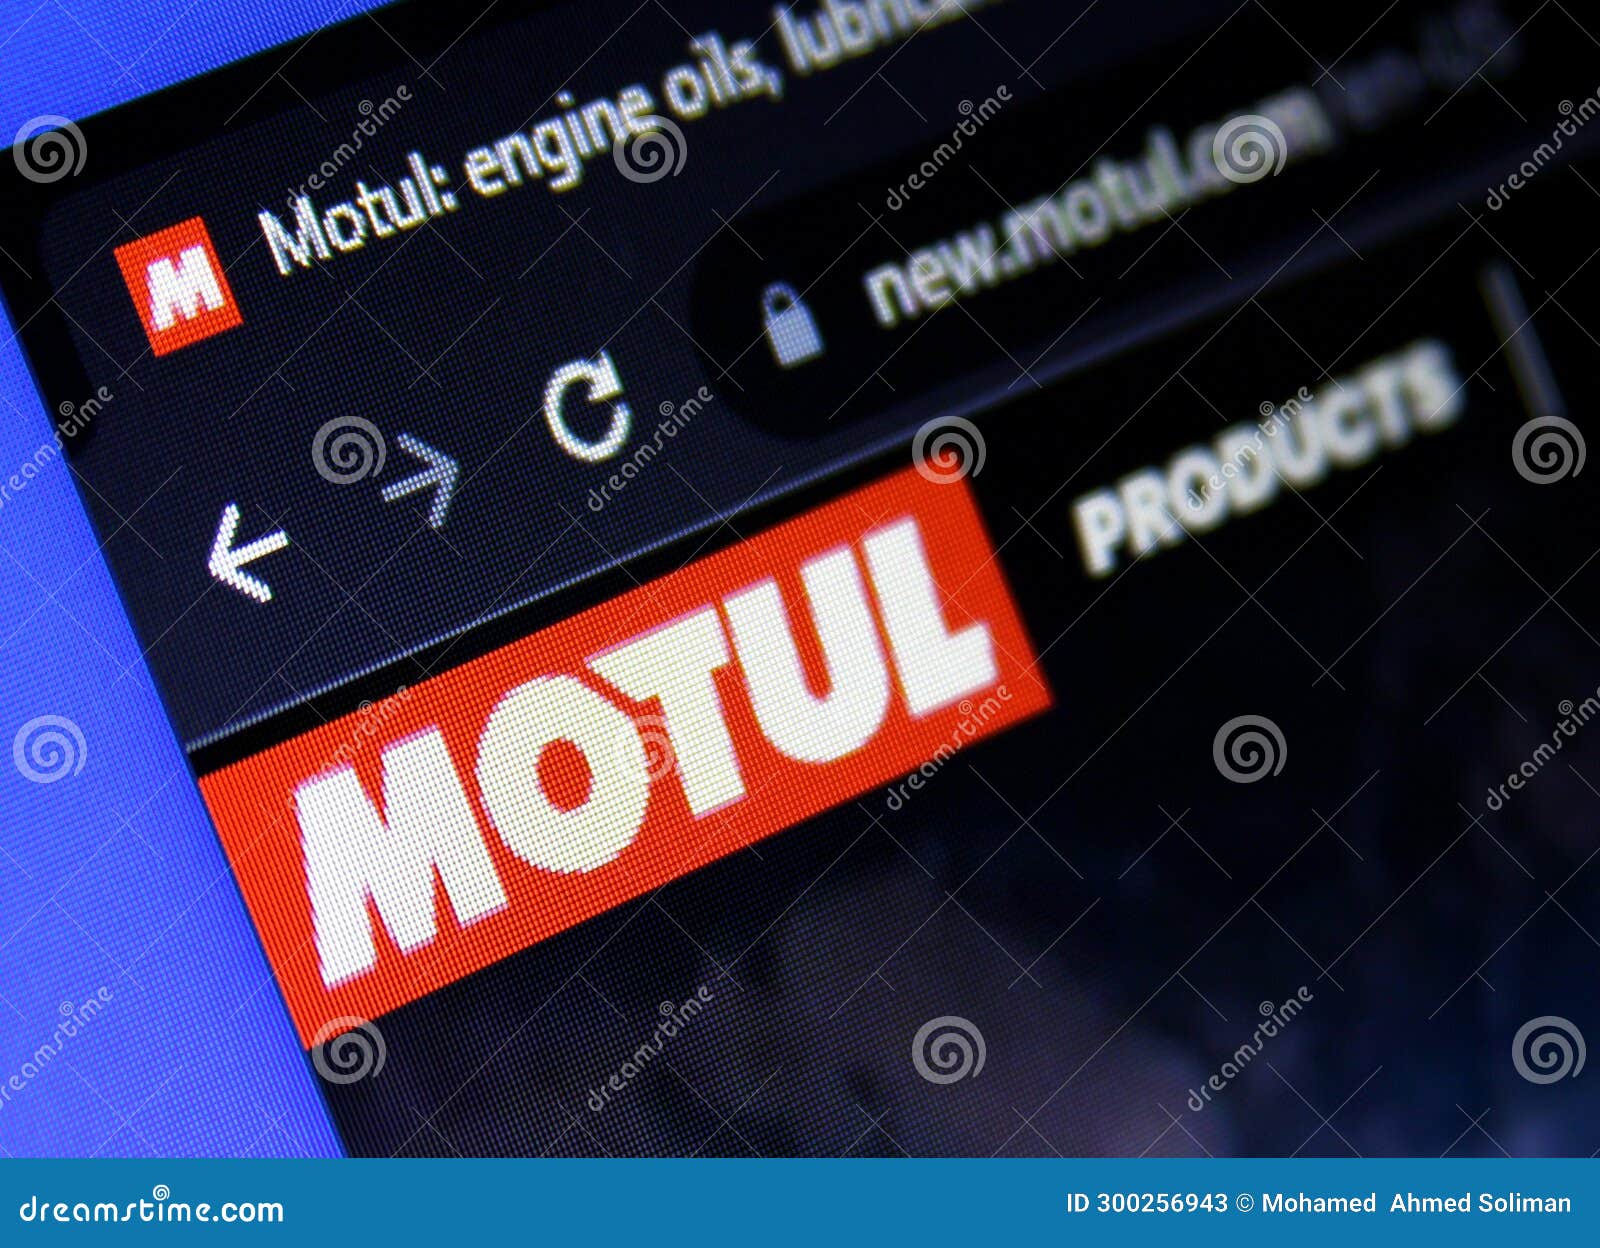 Motul - Oils and lubricants Products